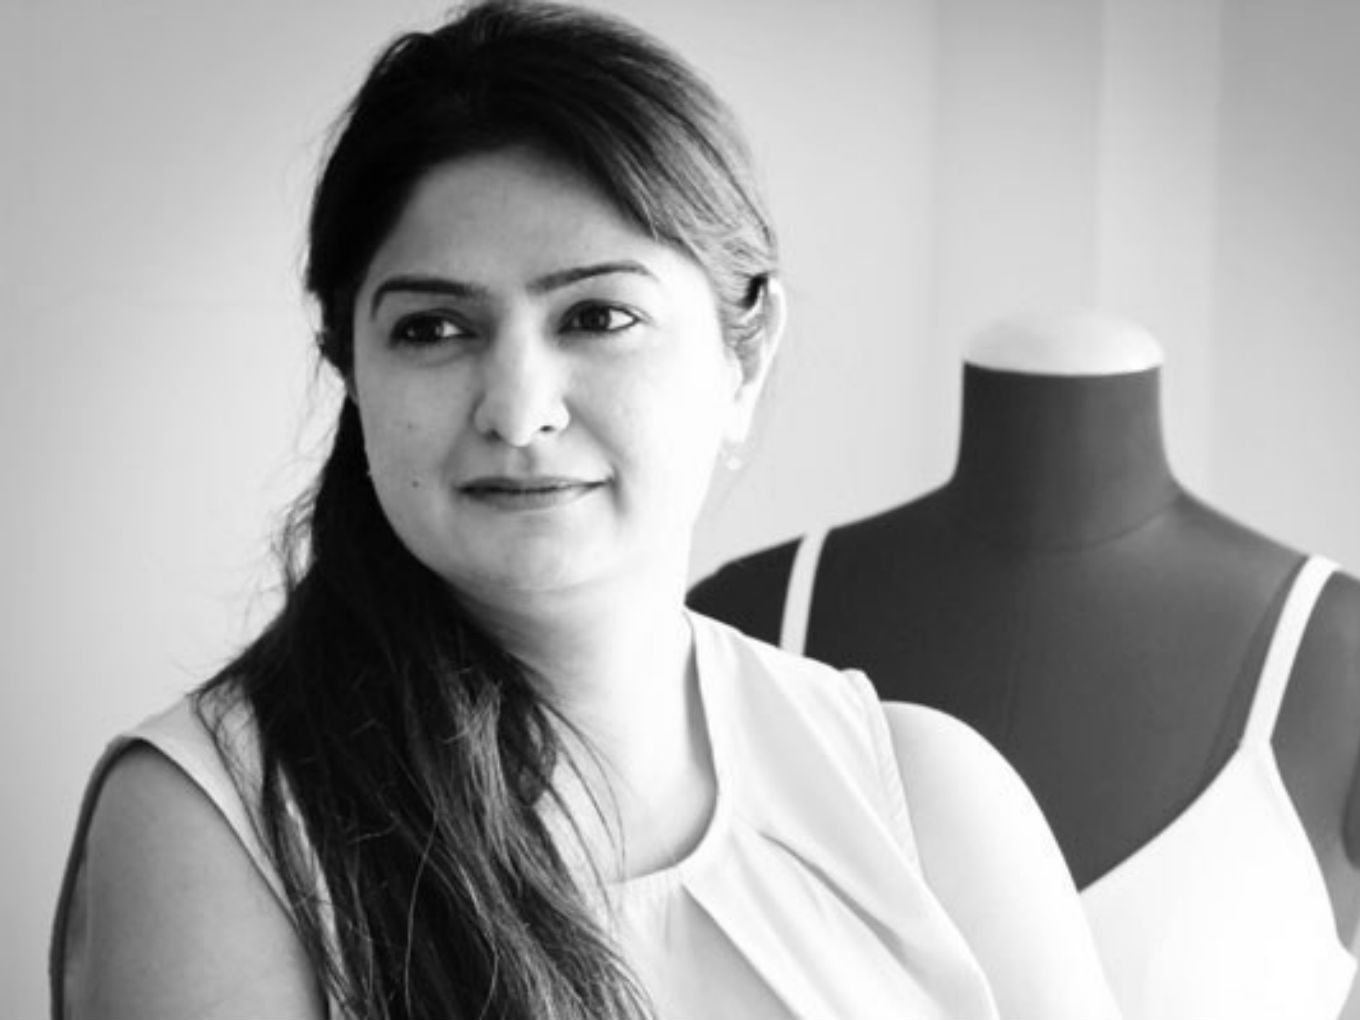 Buttercups Founder Arpita Ganesh Sets On A New Venture, Is Buttercups Out Of Stock?